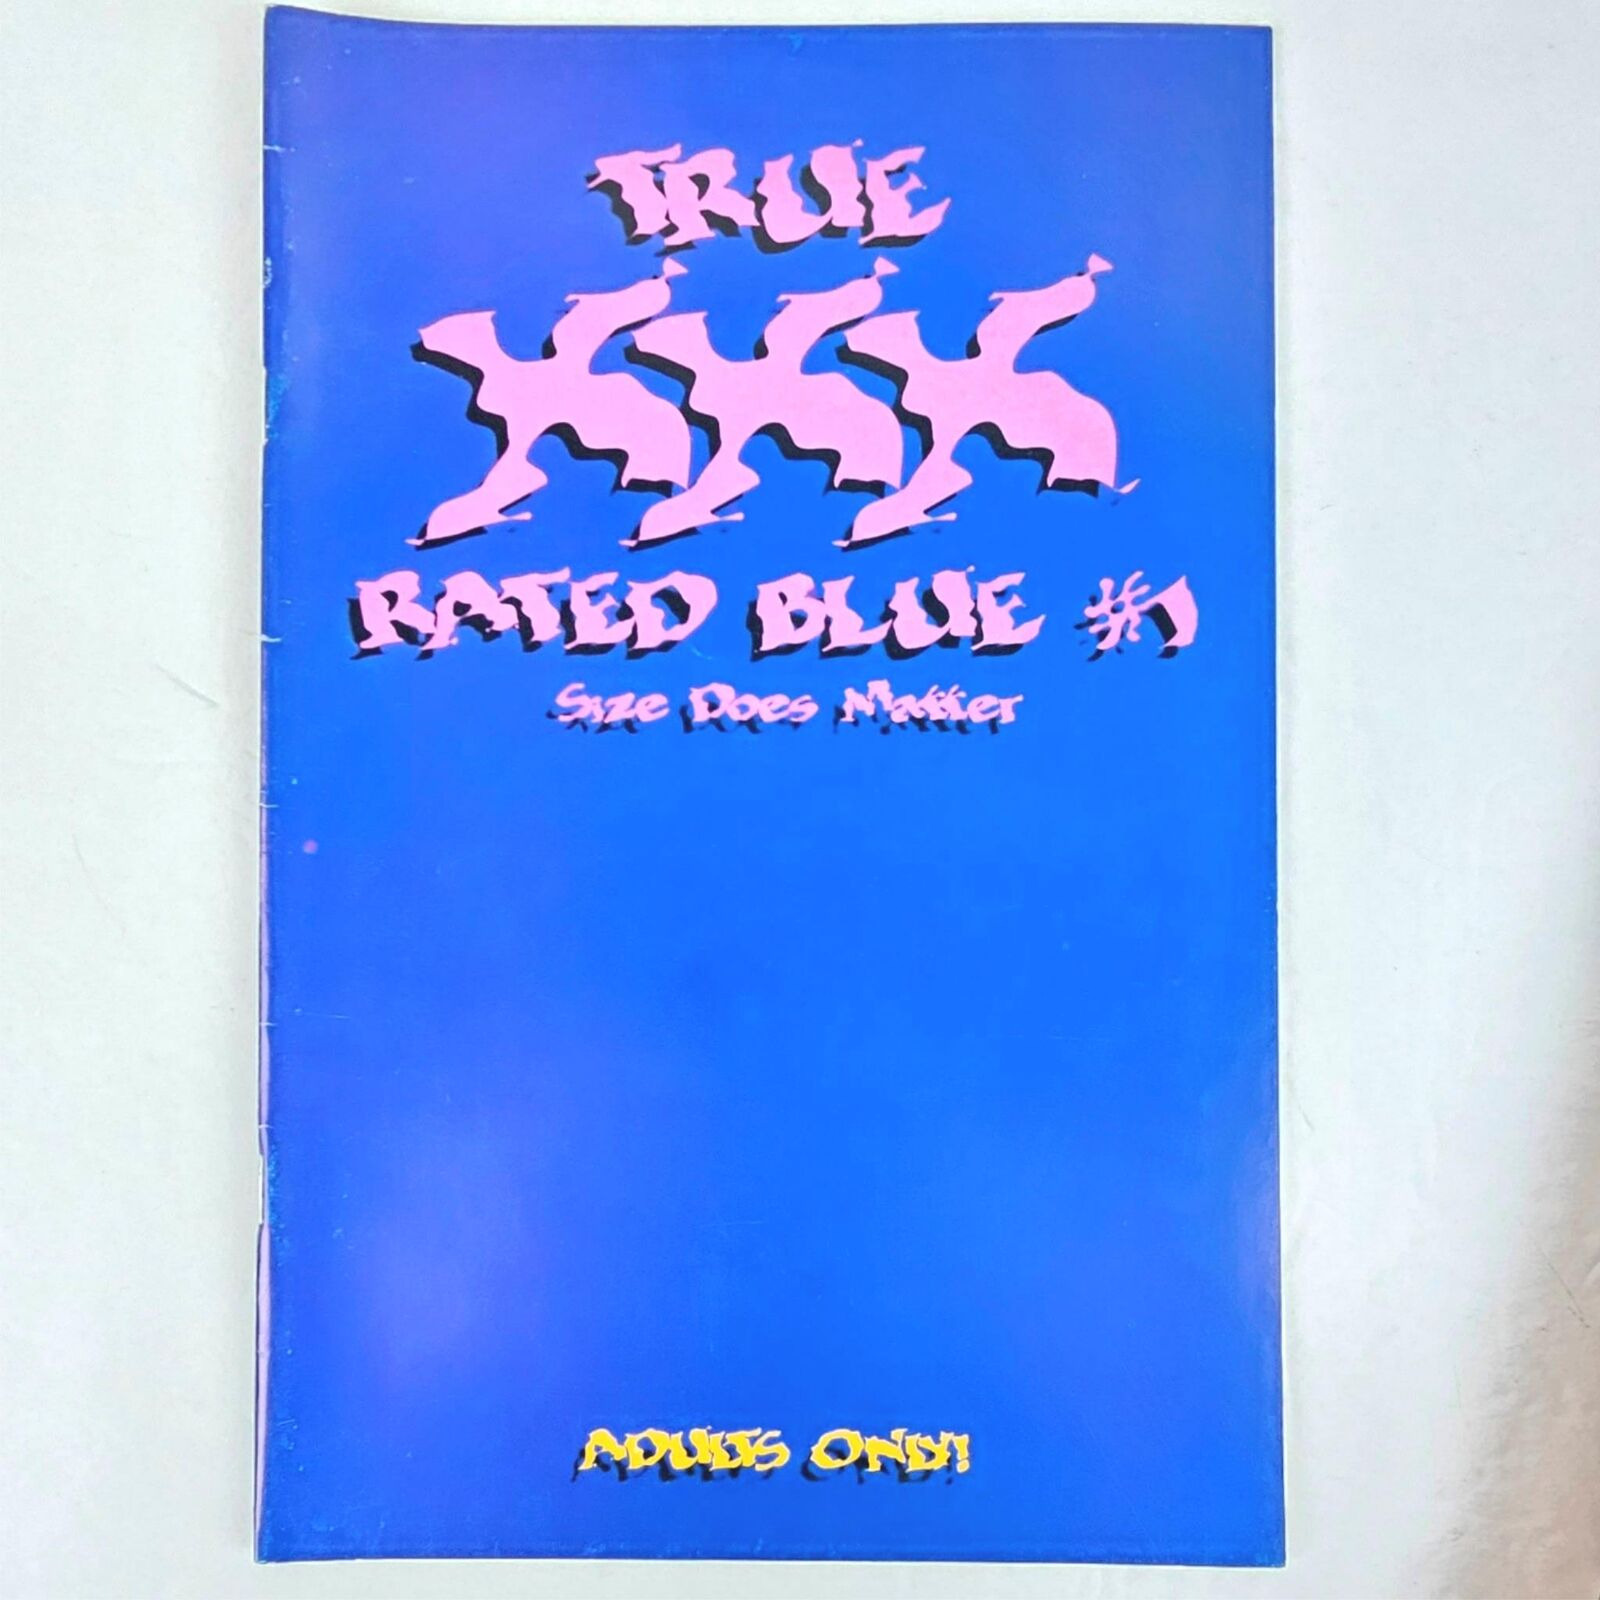 True XXX Rated Blue #1 Size Does Matter 2001